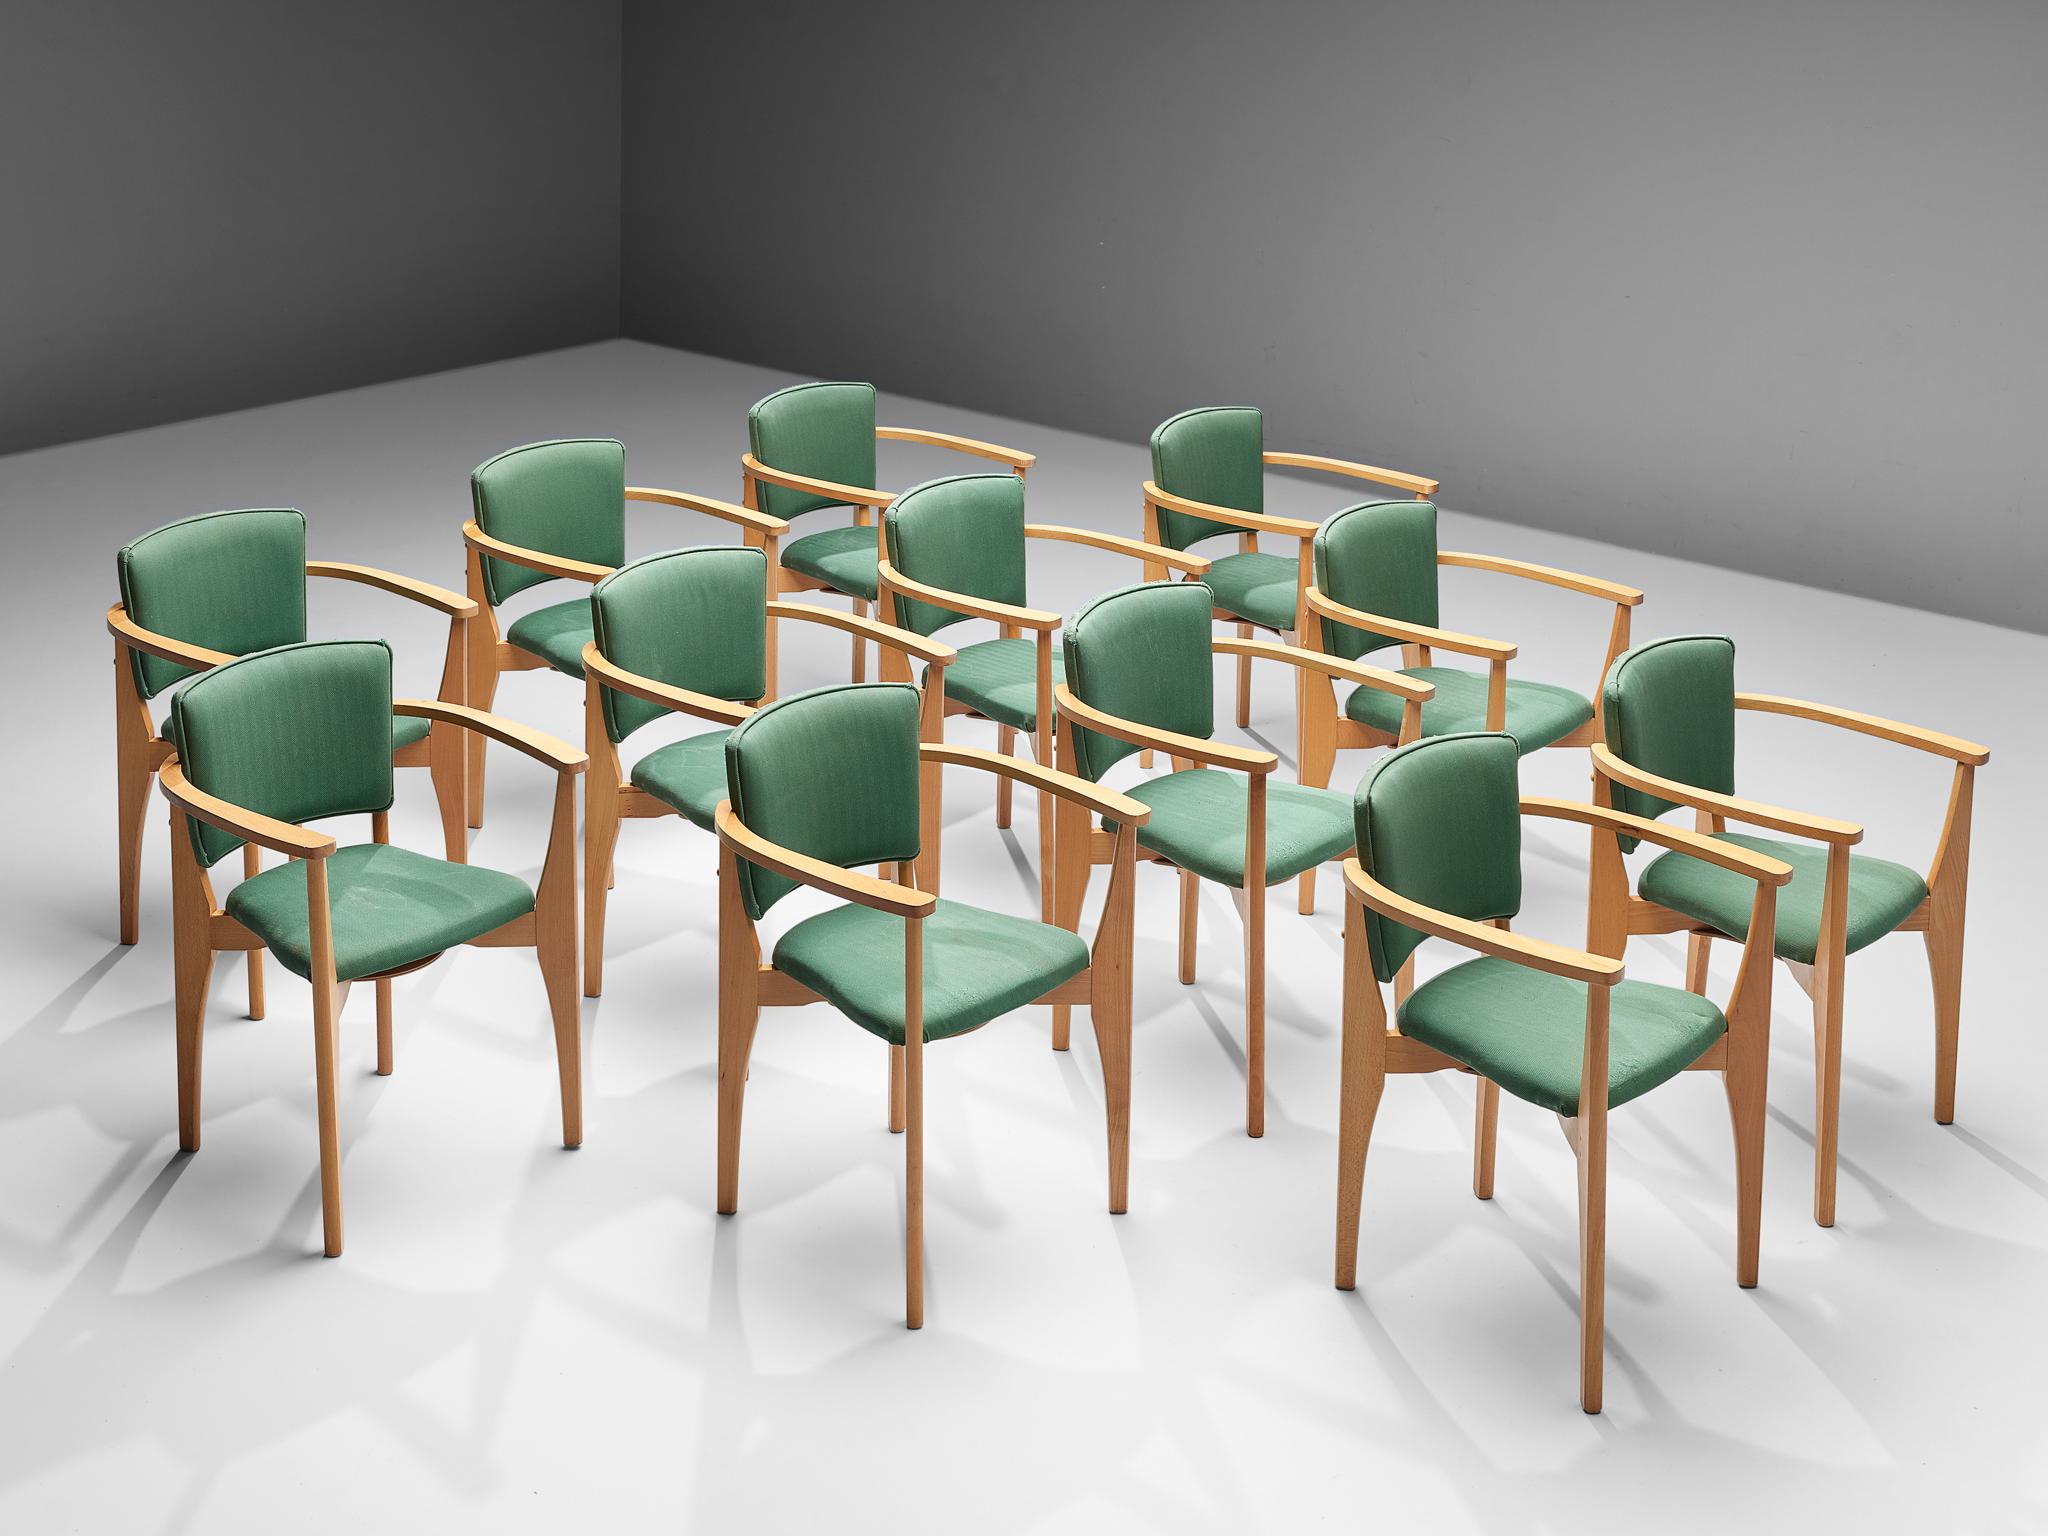 European Dining Chairs in Wood and Green Upholstery